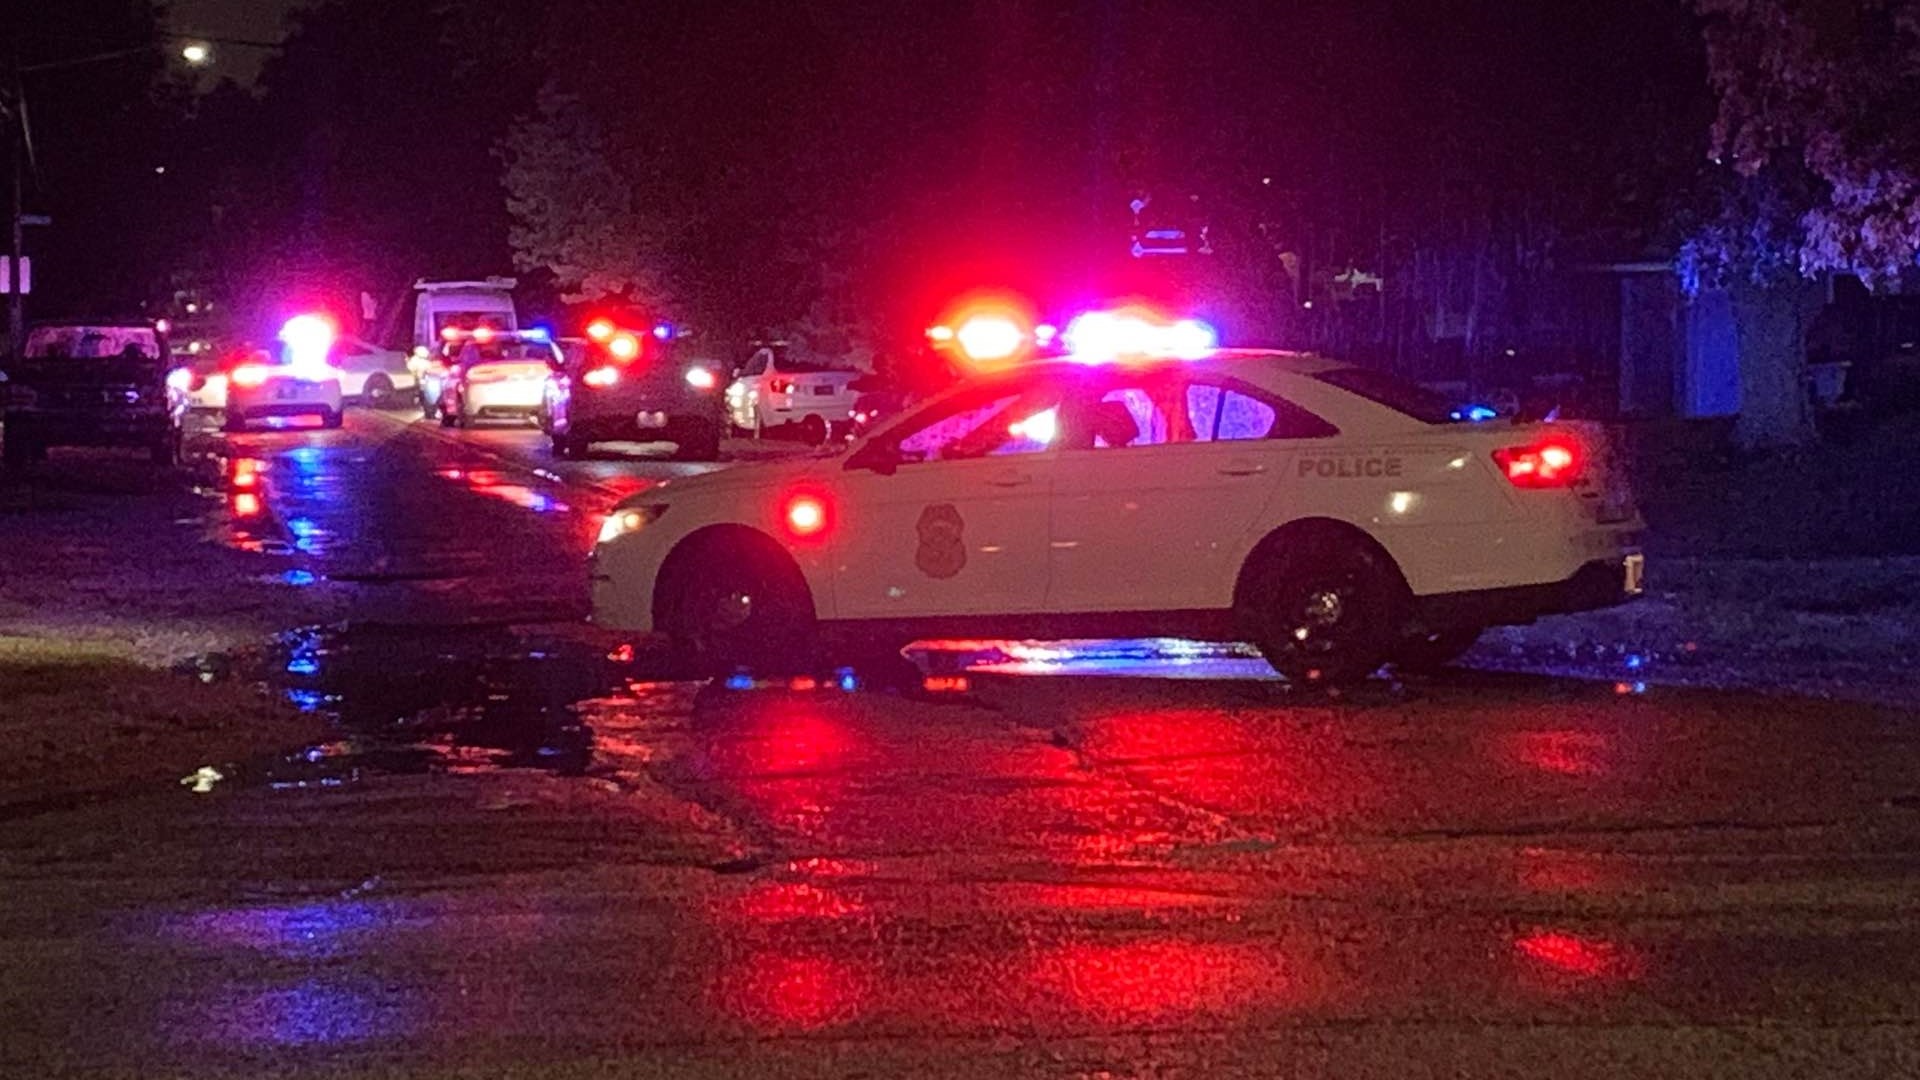 Police responded to the 2900 block of Brill Road, northwest of East Troy and Madison avenues, around 1:15 a.m. on Aug. 29.